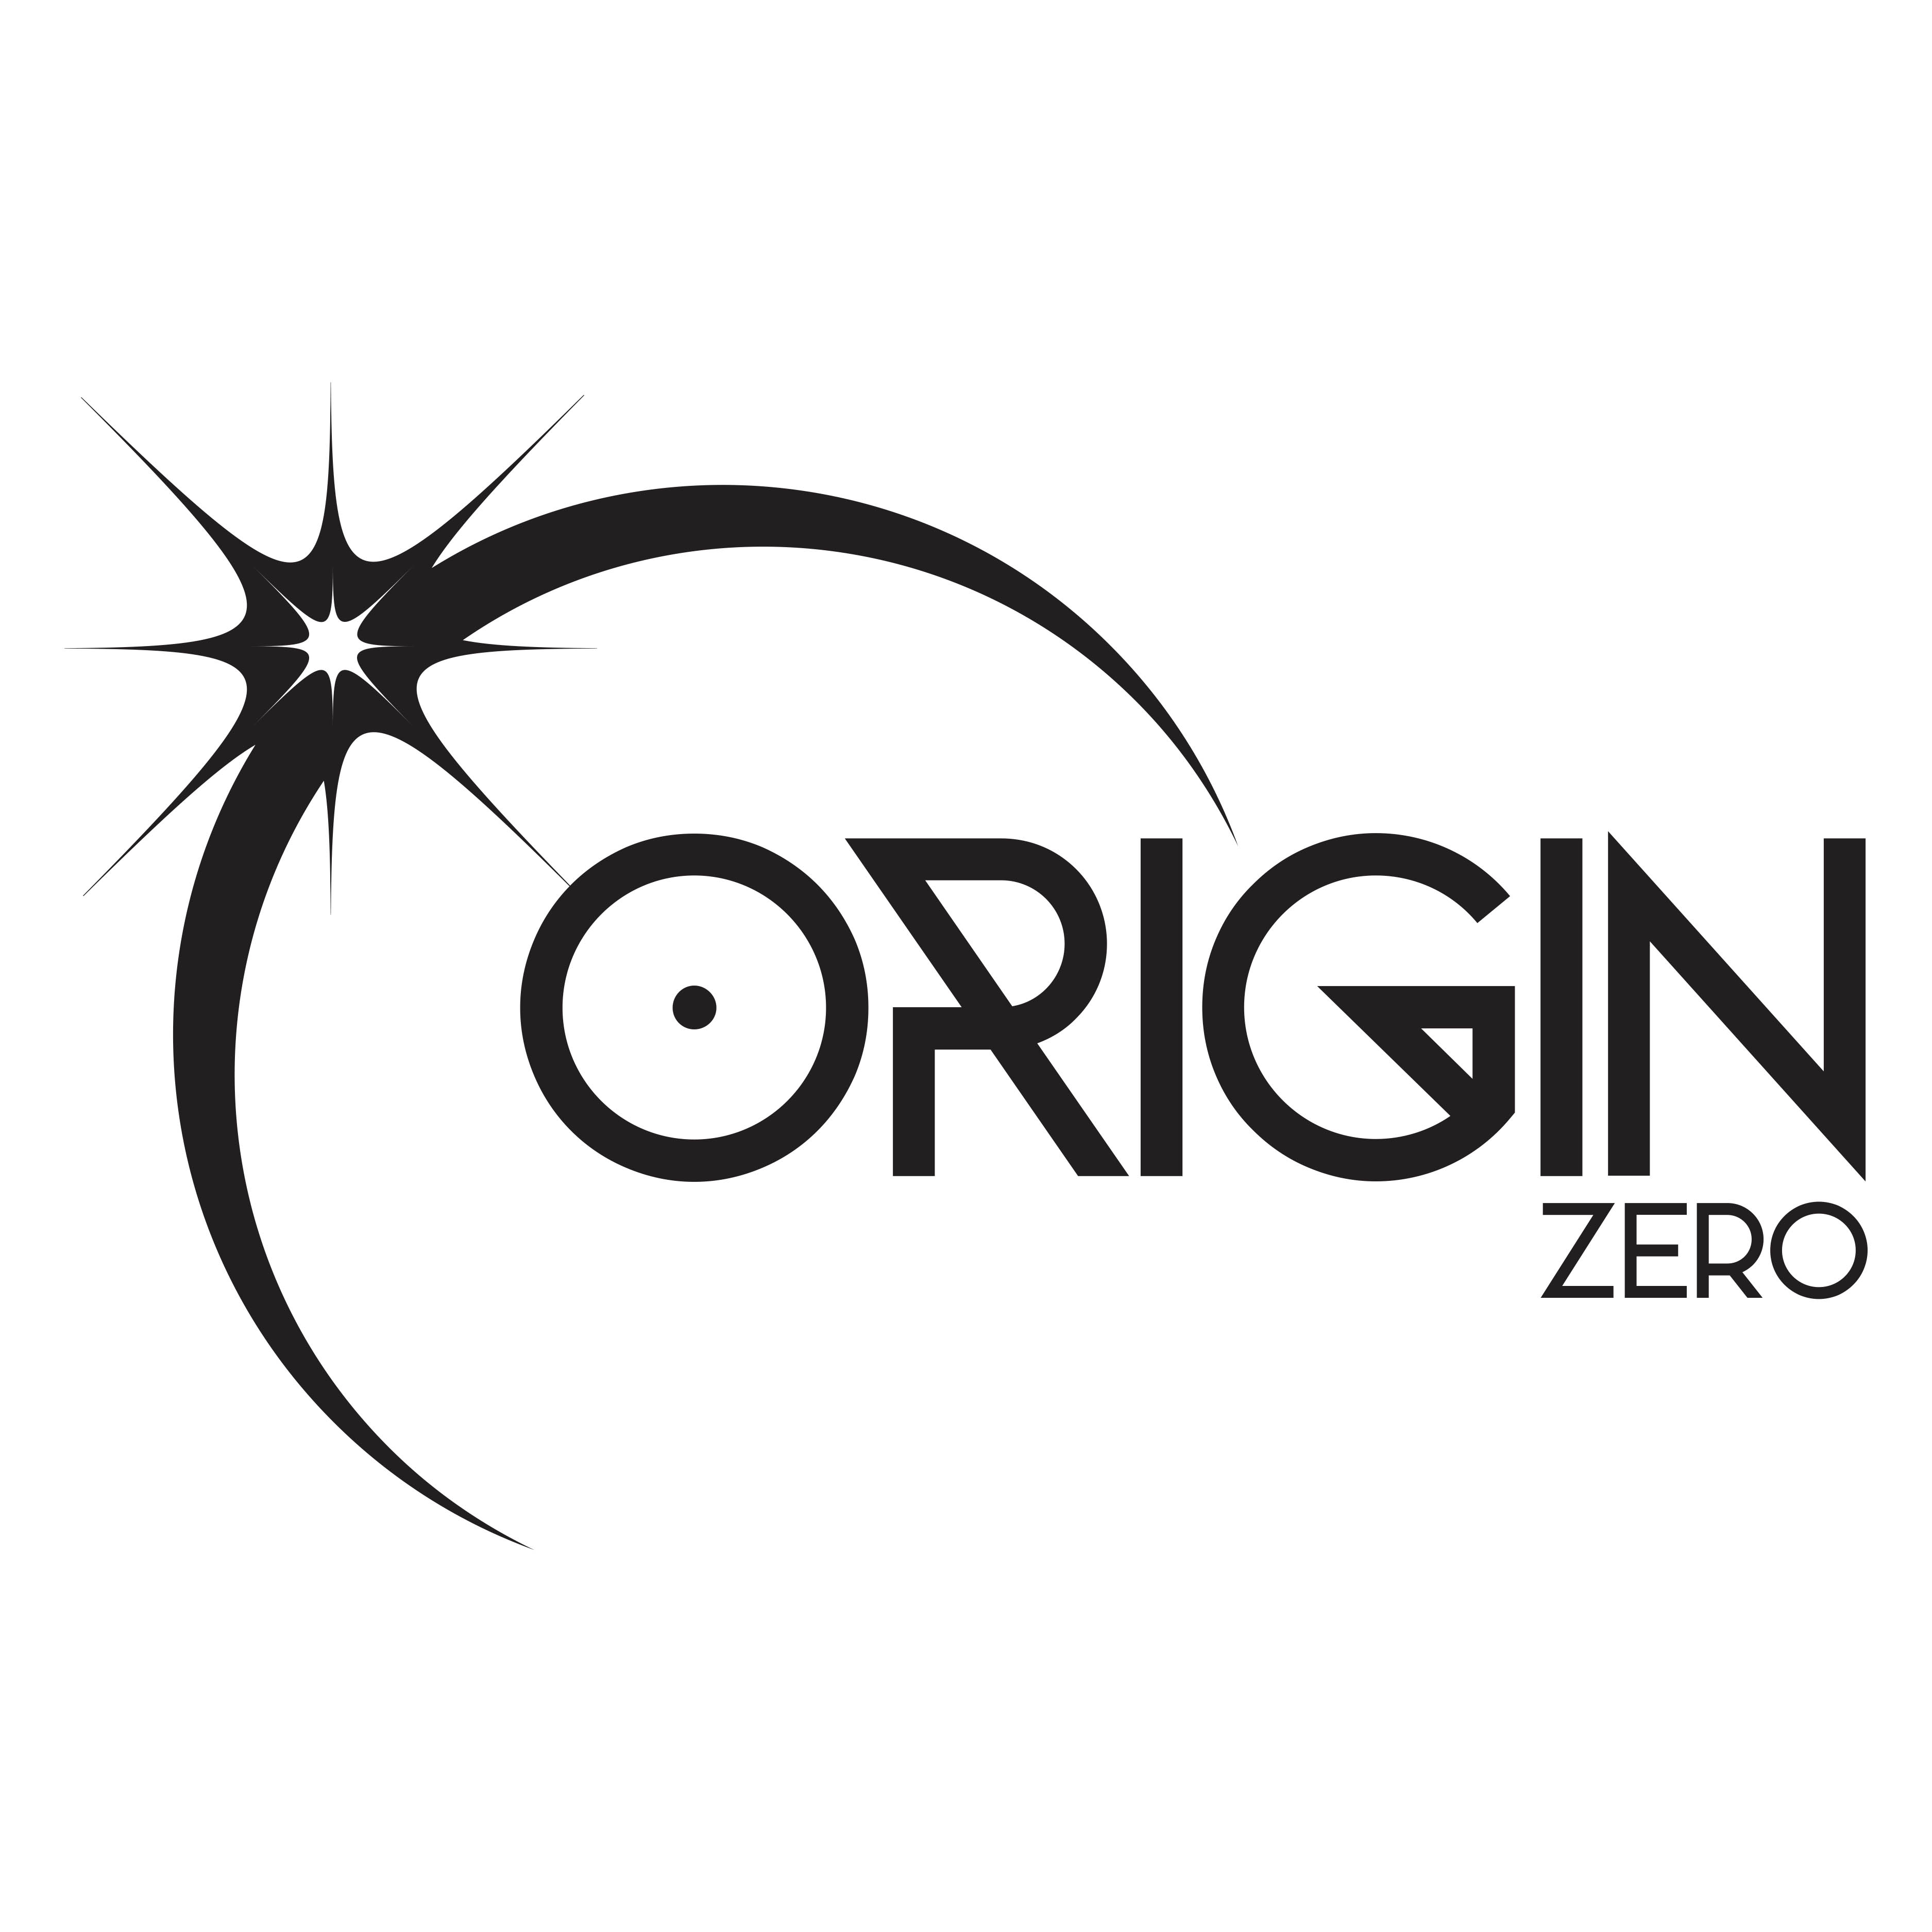 Origin Zero logo design by logo designer 3 Clever Broads for your inspiration and for the worlds largest logo competition